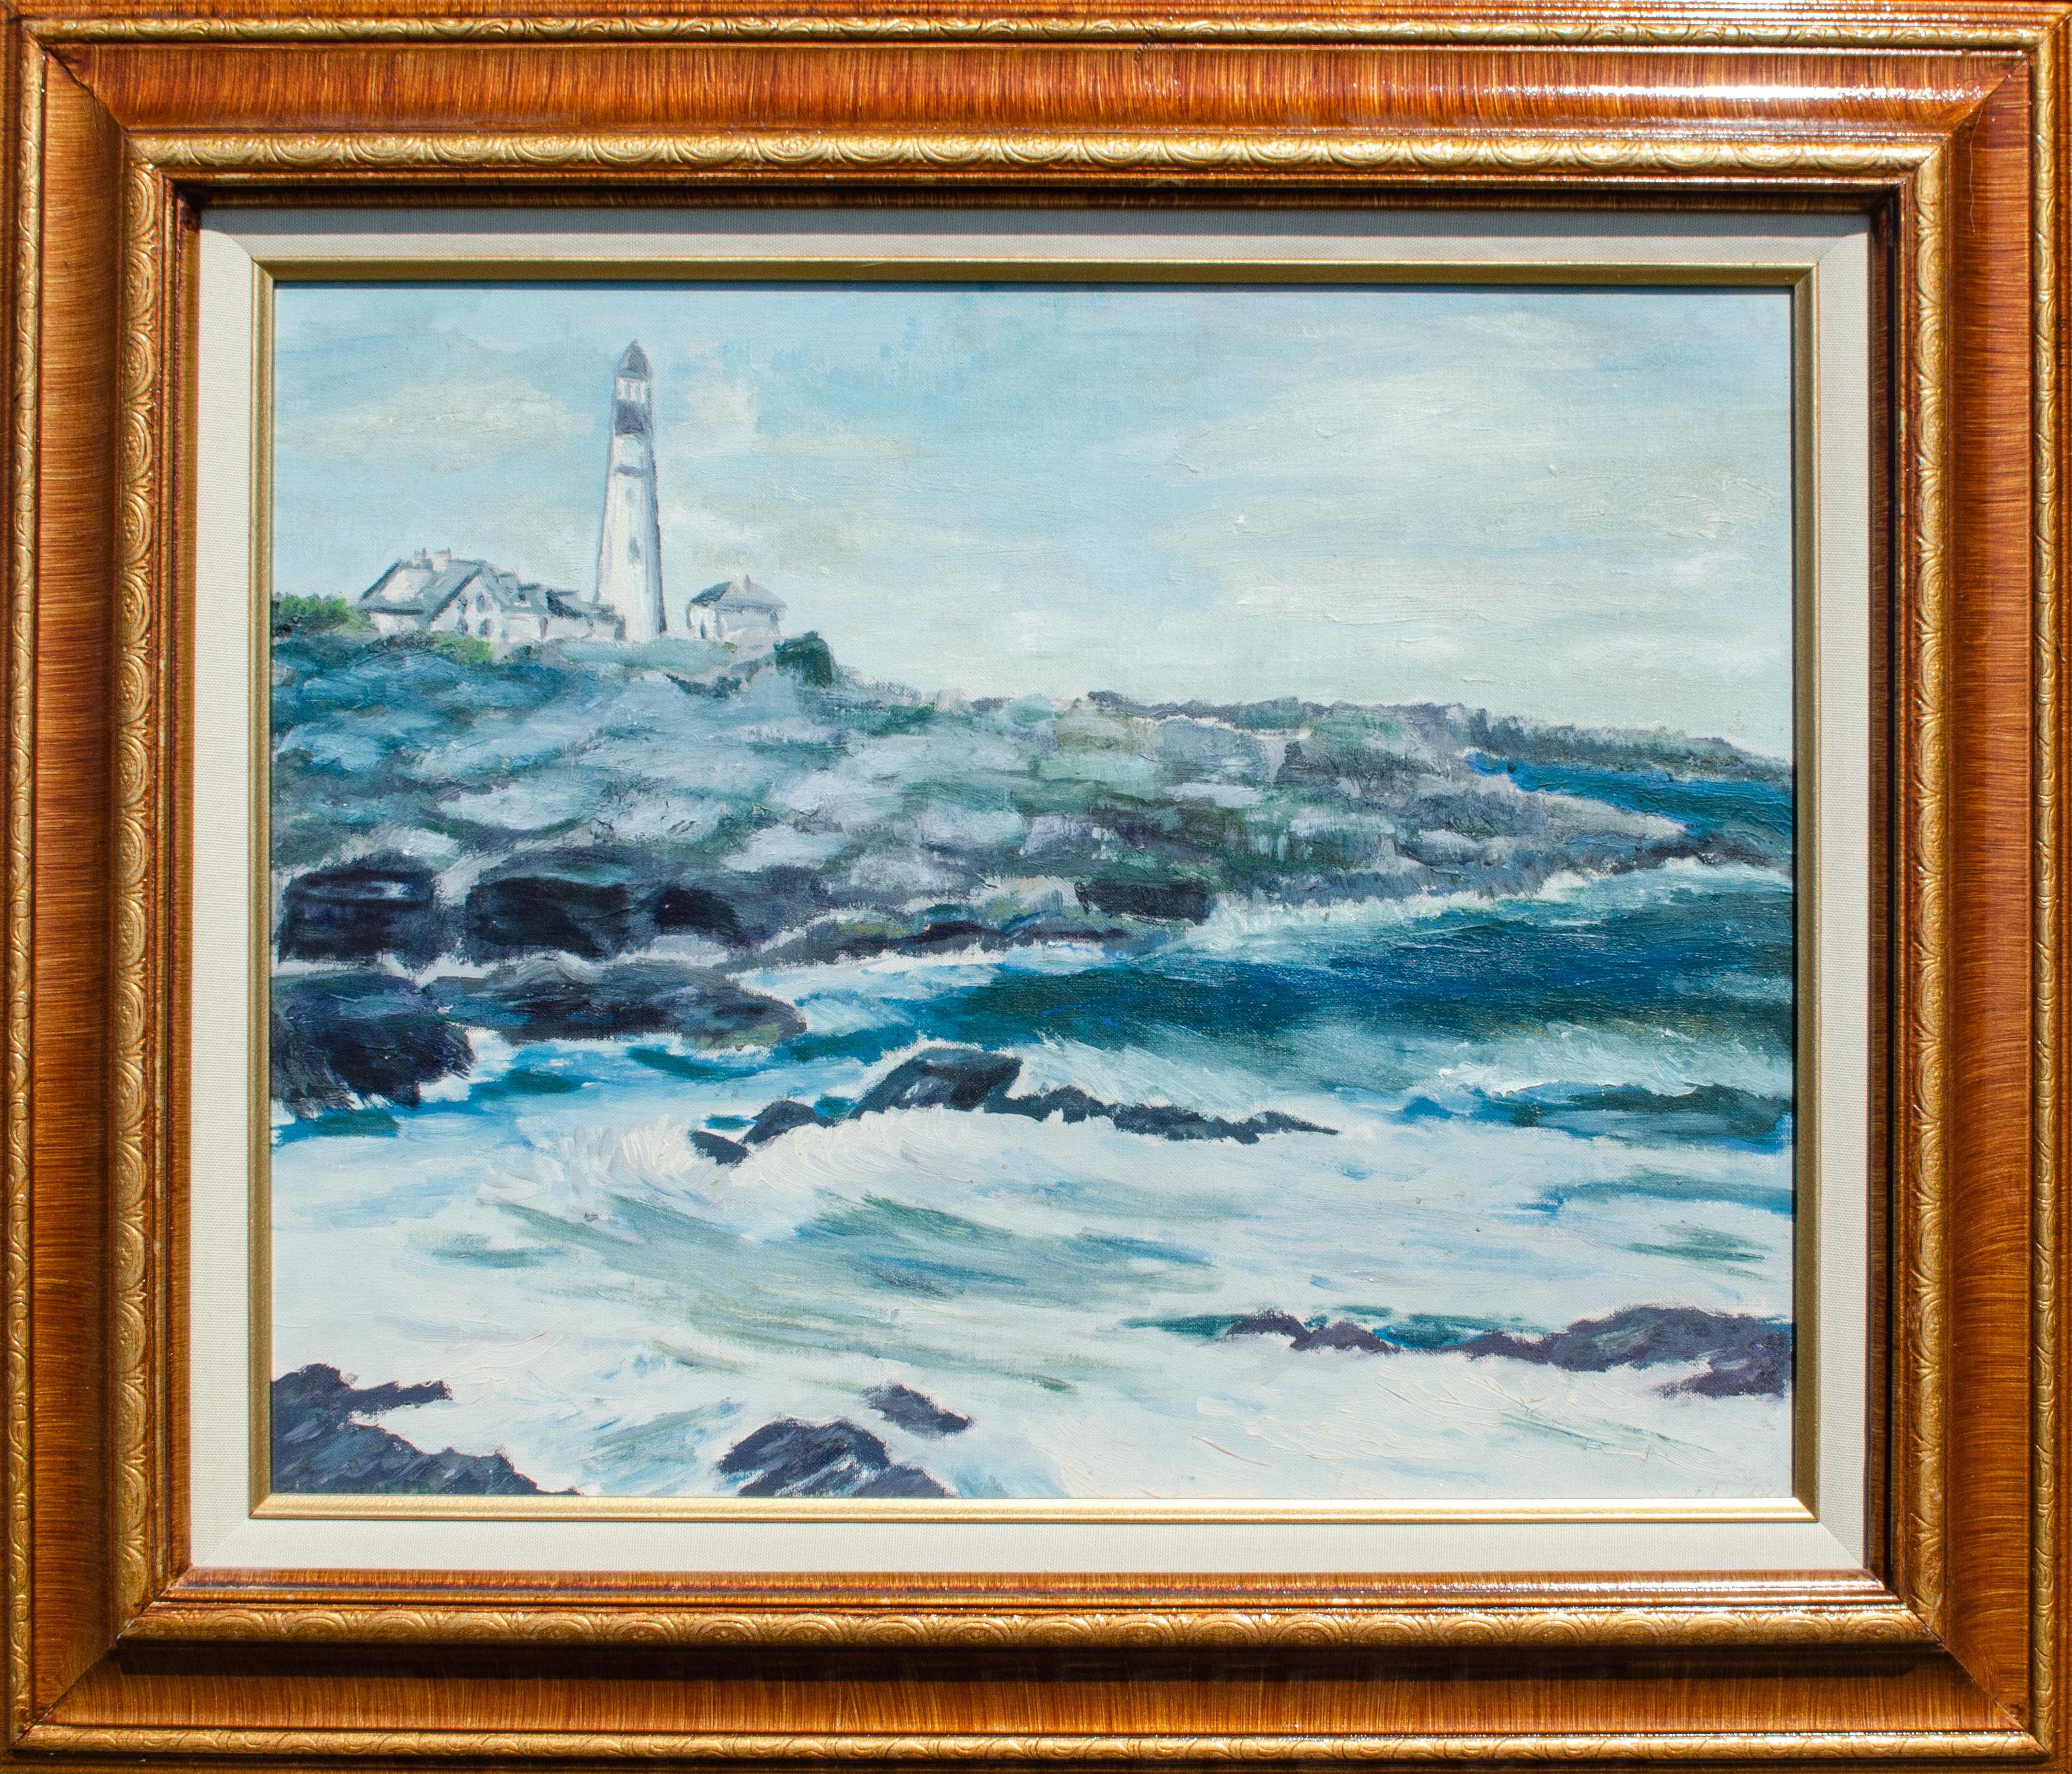 Fran Dinhofer 
Untitled (Seaside Lighthouse), c. Late 20th century
Oil on artist board
16 x 20 in.
Framed: 23 x 27 x 1 1/2 in.
Signed lower right, inscribed verso

This painting was created by a female Jewish artist based in Jericho, Long Island. 